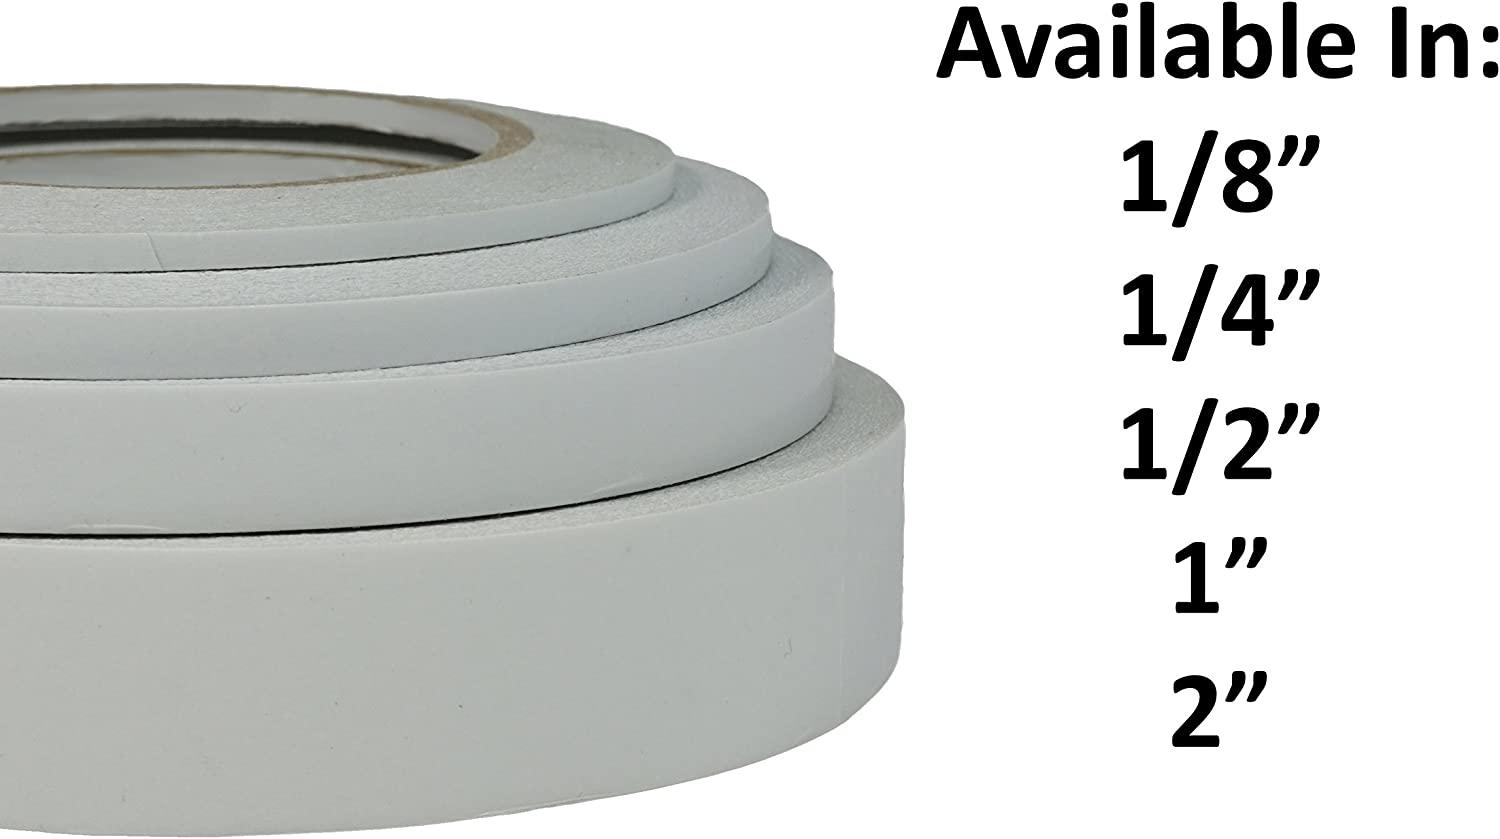 WOD Tape Double Sided Tissue Craft Adhesive Tape 1.5 in. x 55 yd. Gift Wrap